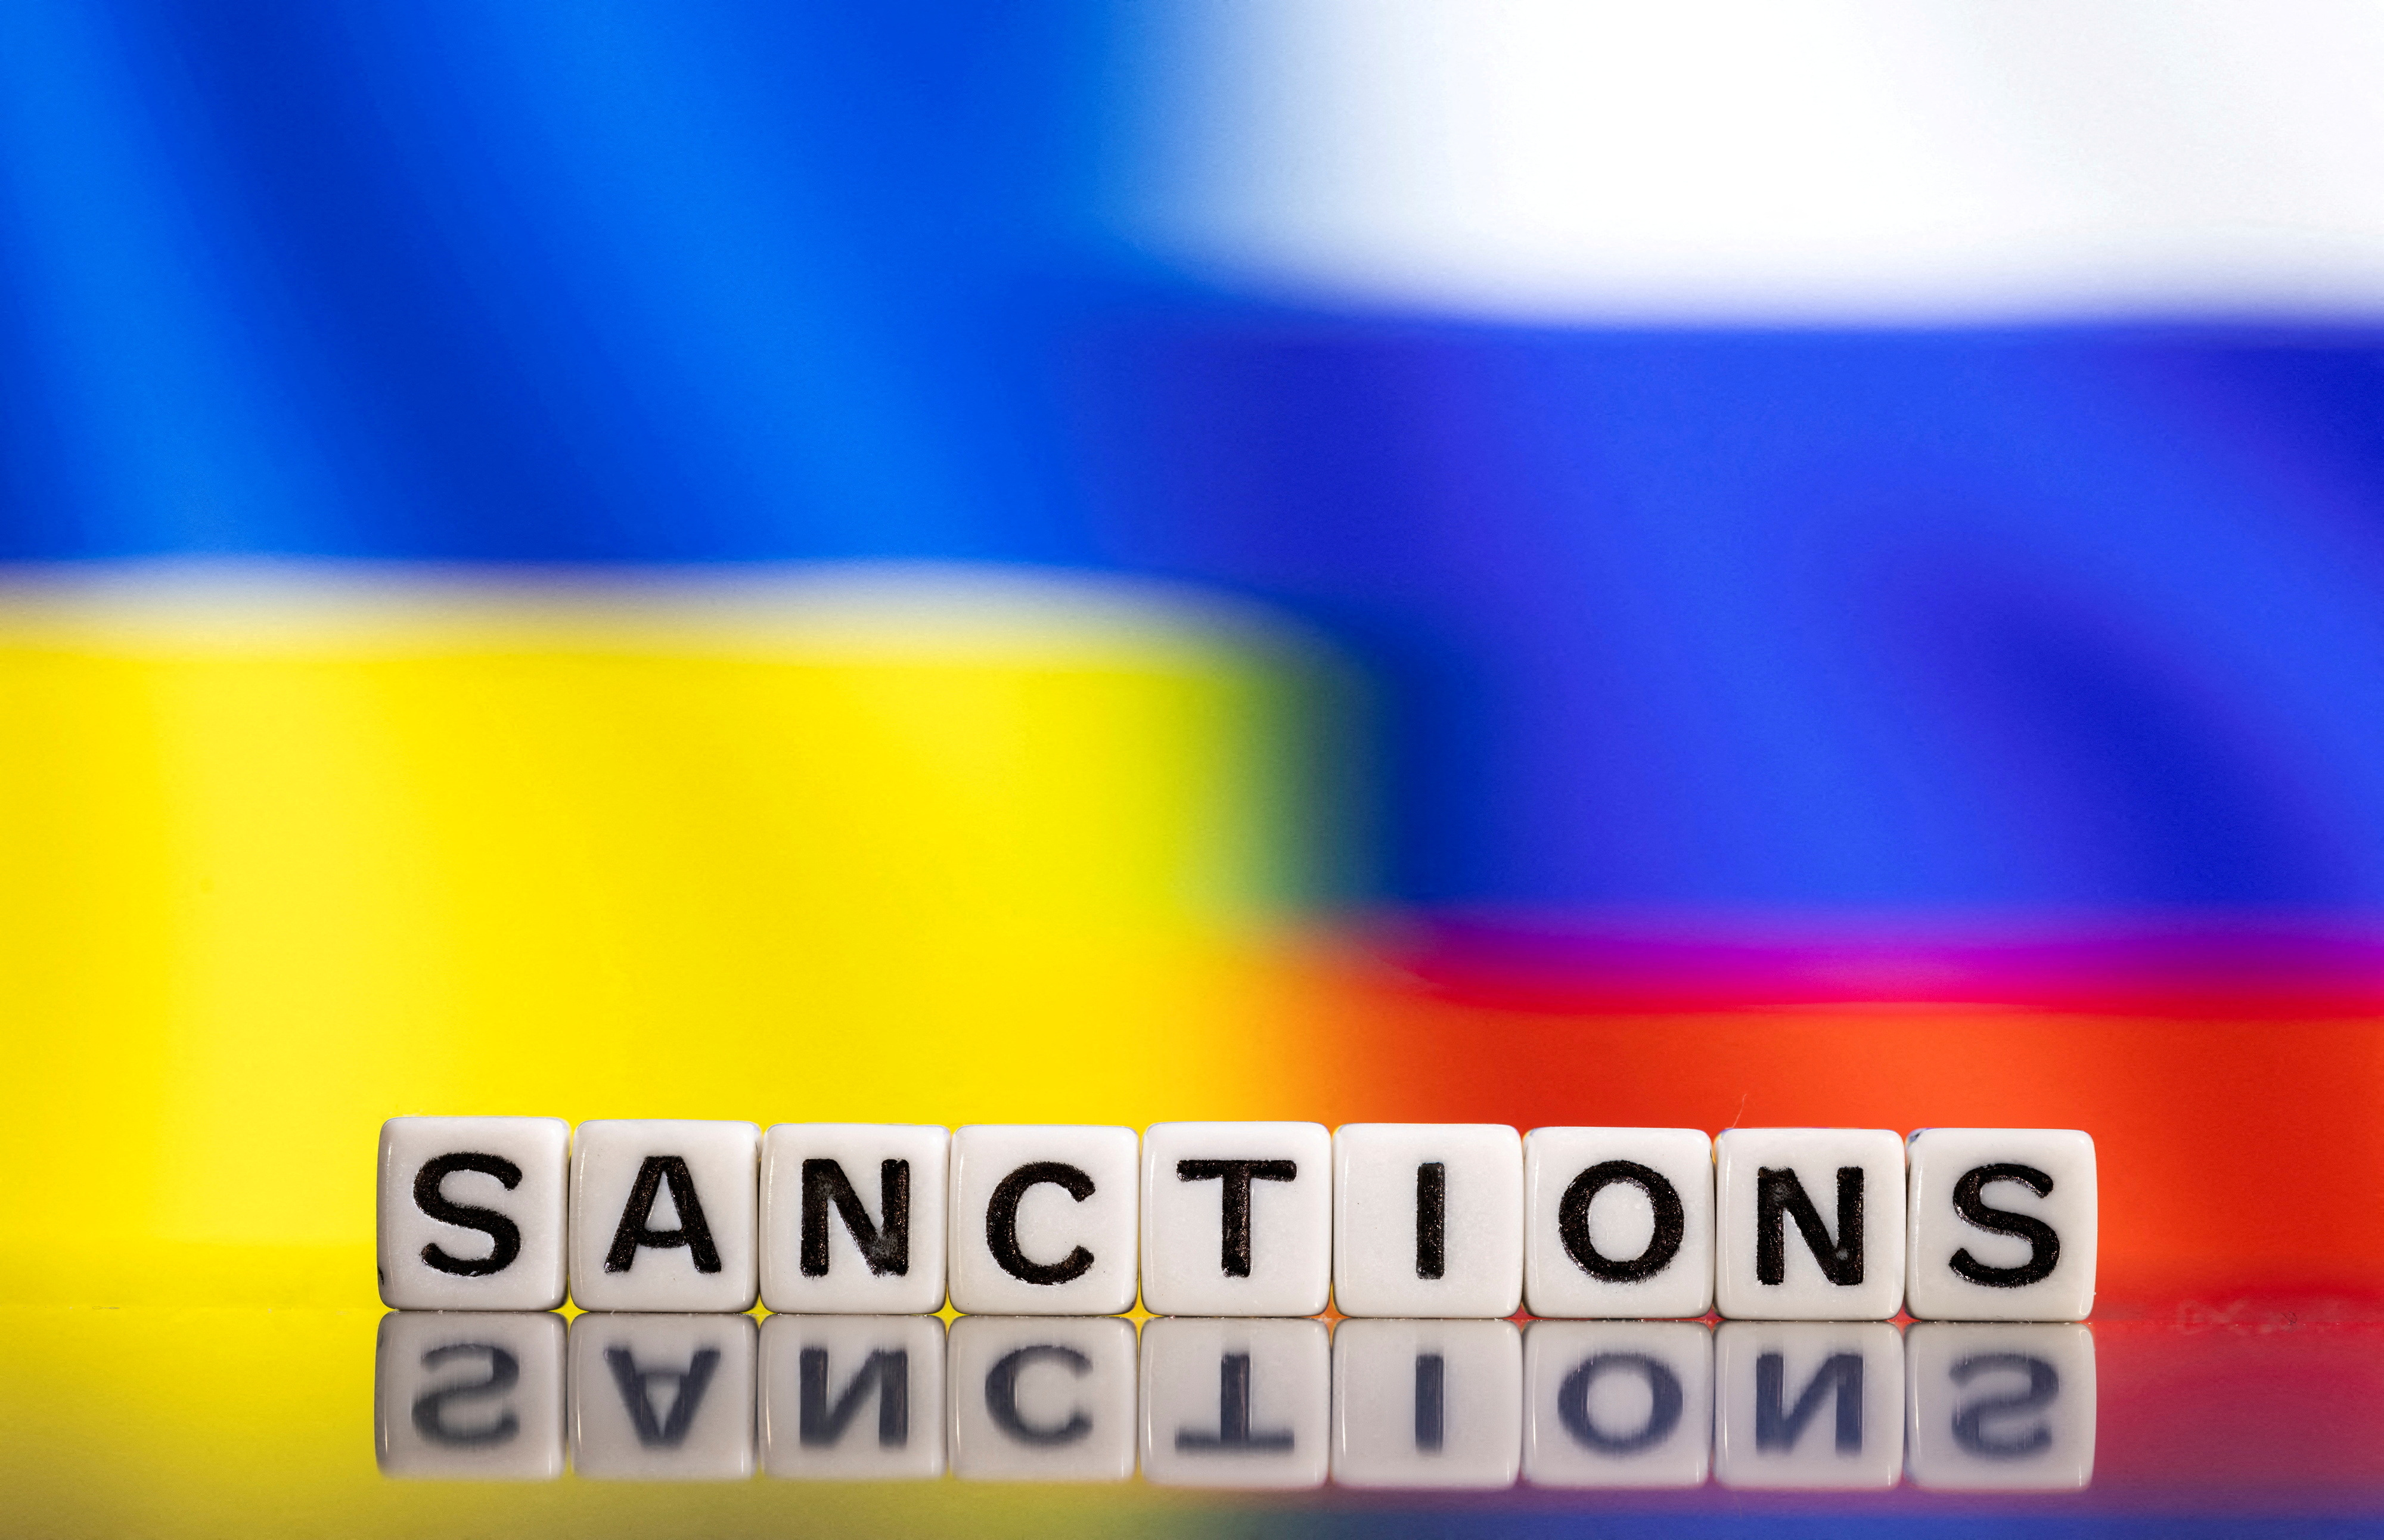 Illustration shows letters arranged to read "Sanctions"  in front of Ukraine's and Russia's flag colors